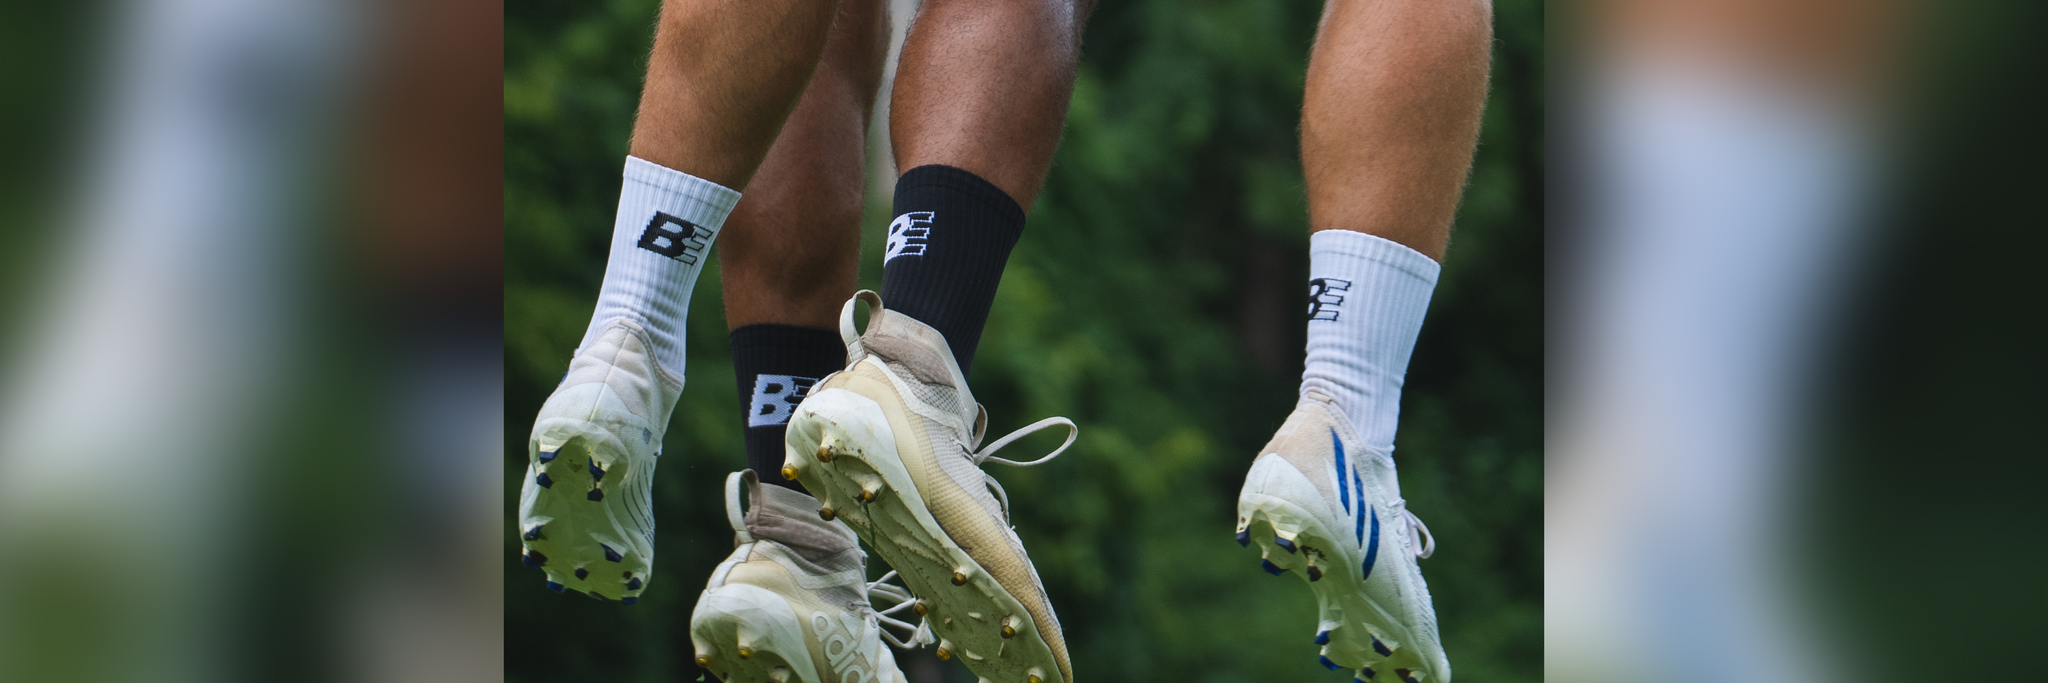 INTRODUCING: The BE Ultimate White Enduro Socks